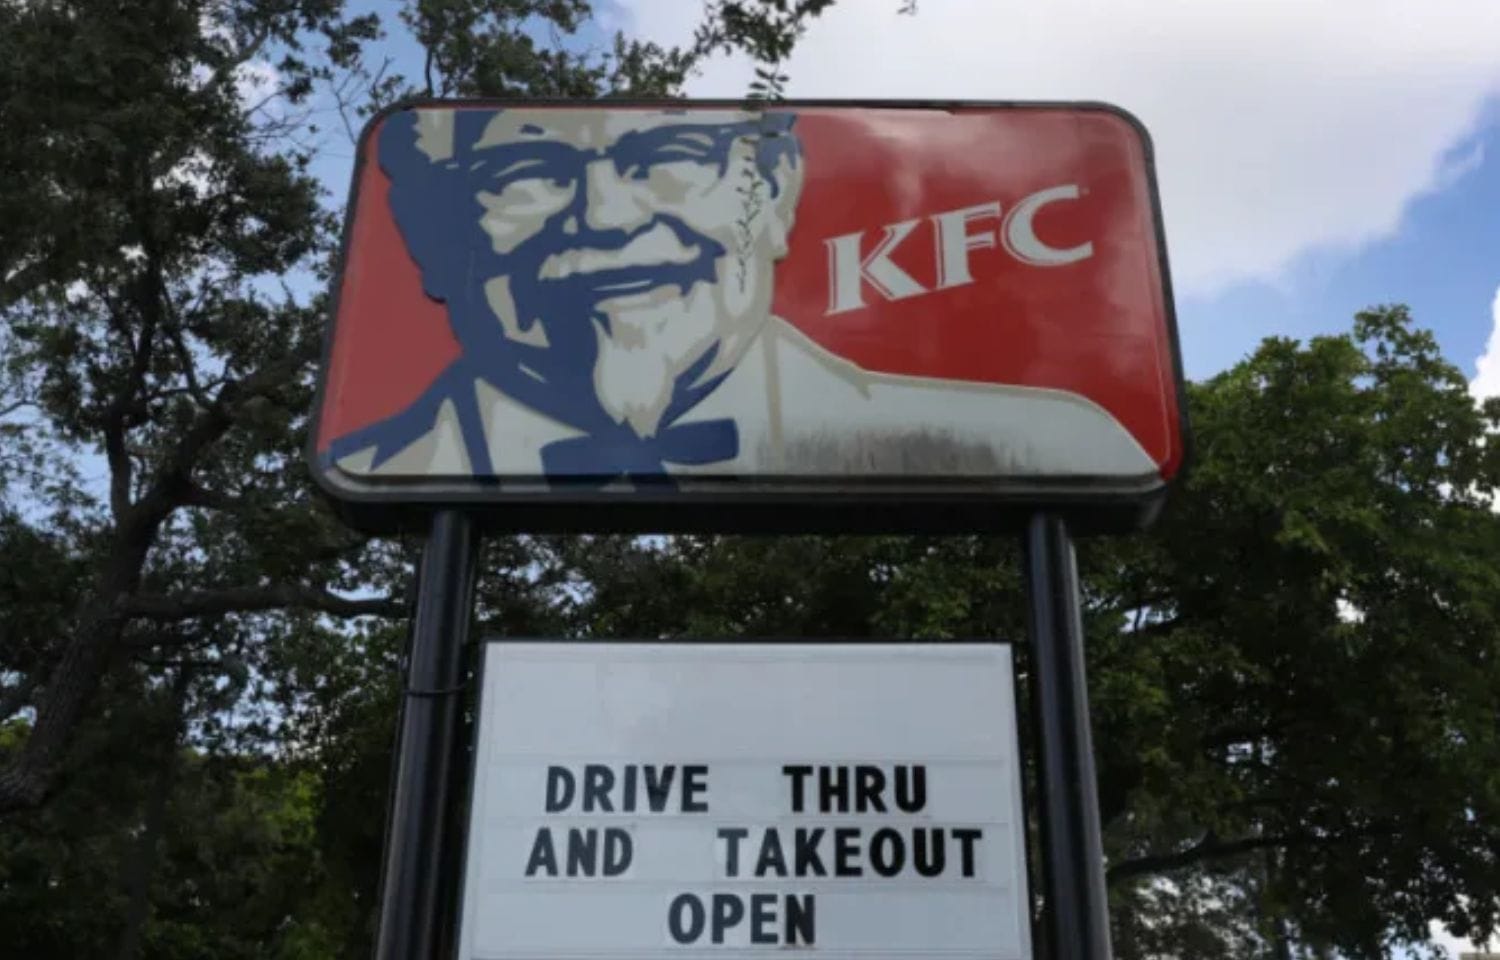 Is kfc Open On New Year's Day?